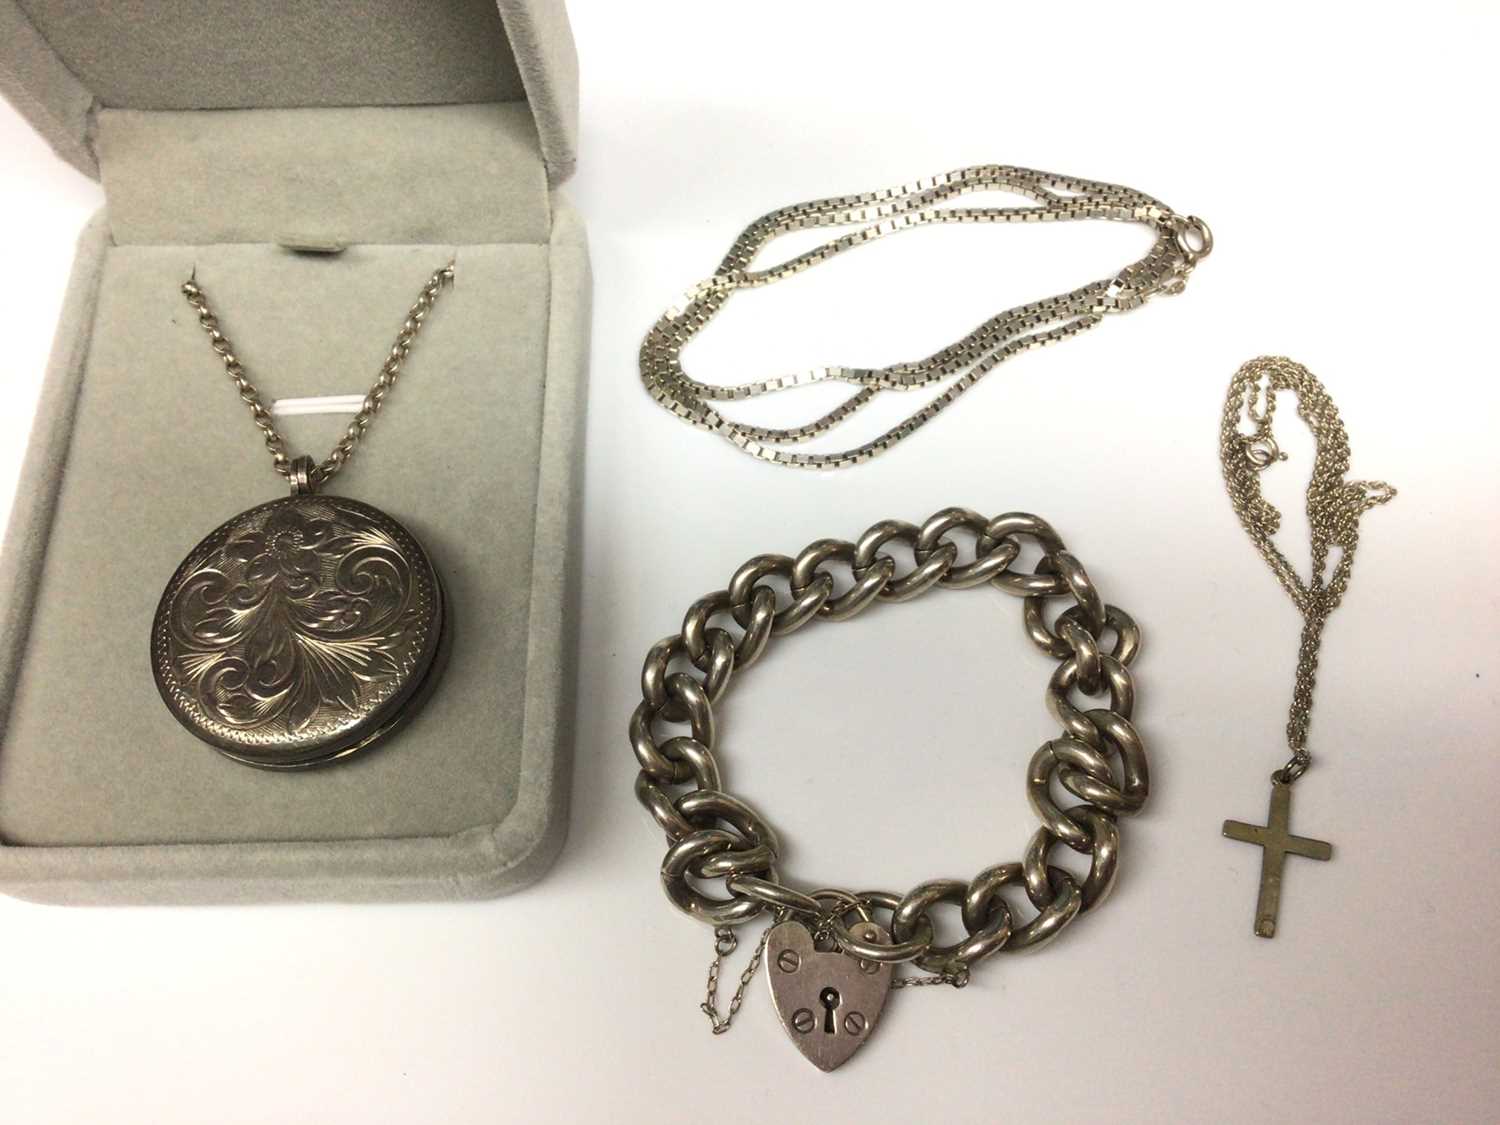 Lot 9 - Heavy silver curb link bracelet with padlock clasp, silver locket on chain, cross pendant on chain and a silver box link chain